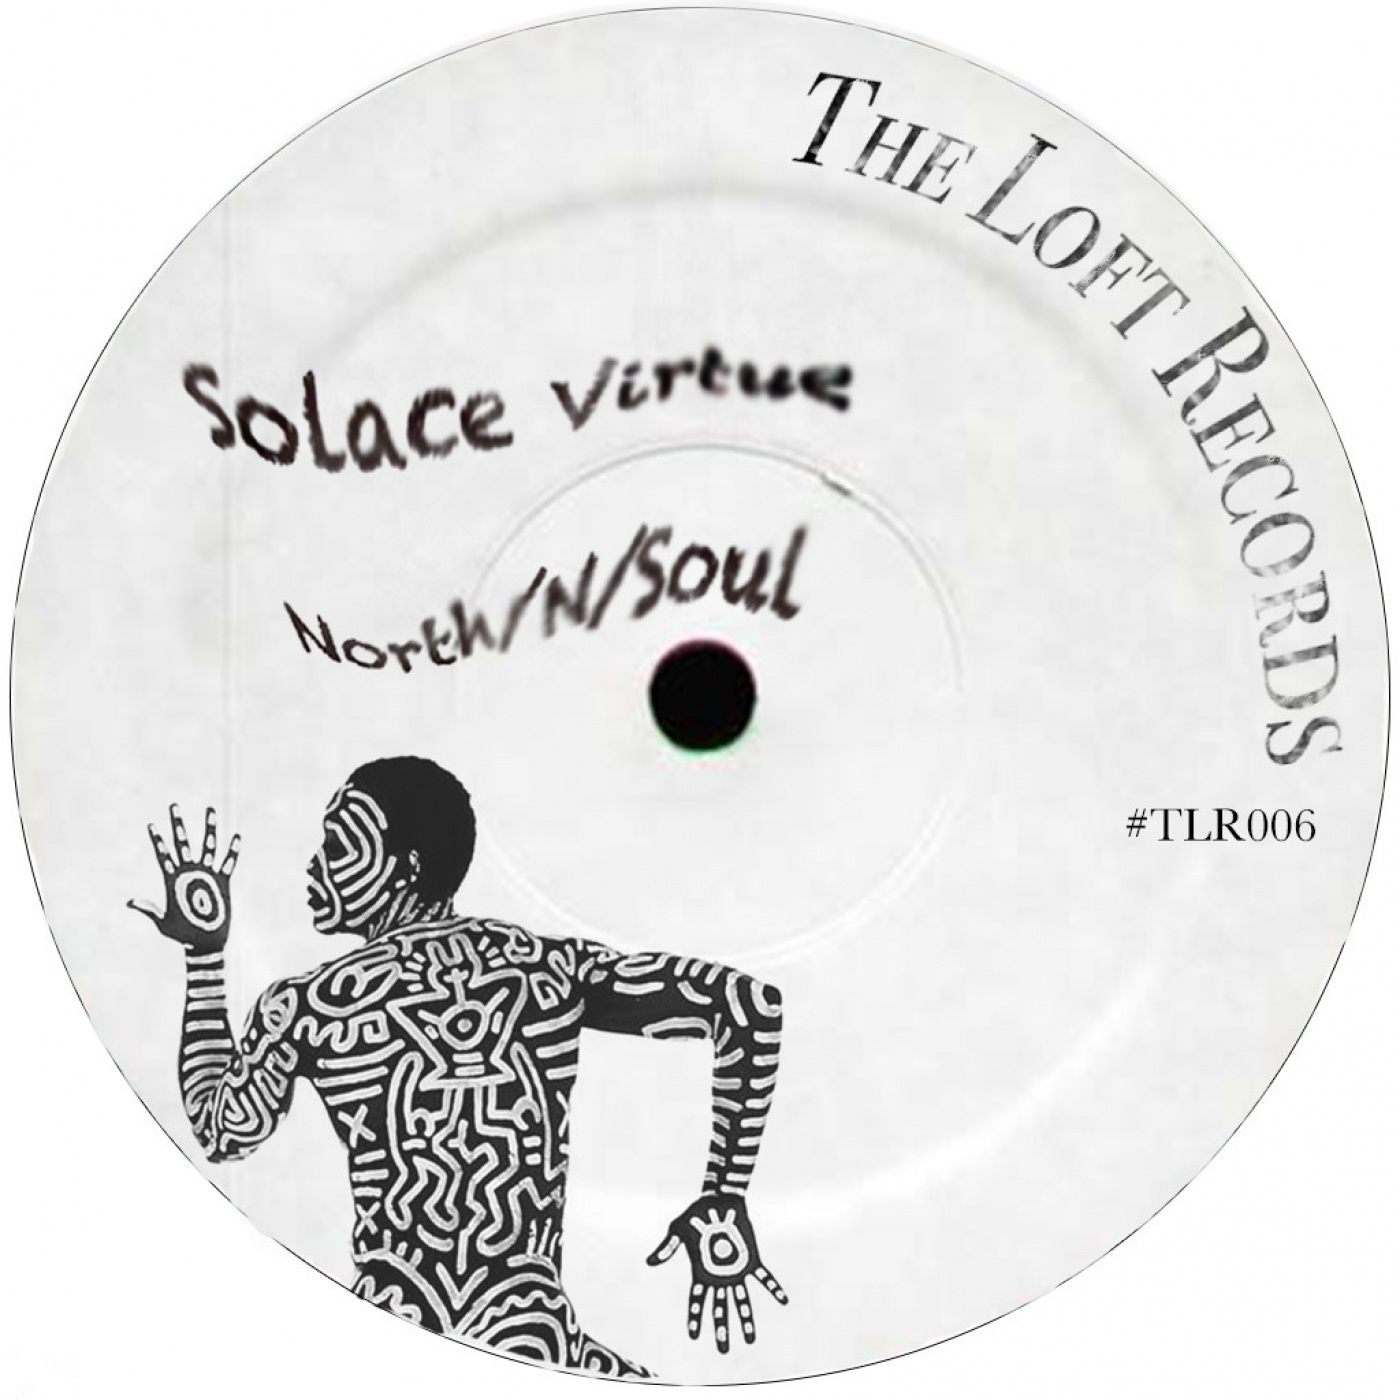 Solace Virtue - North/N/Soul / The Loft Records